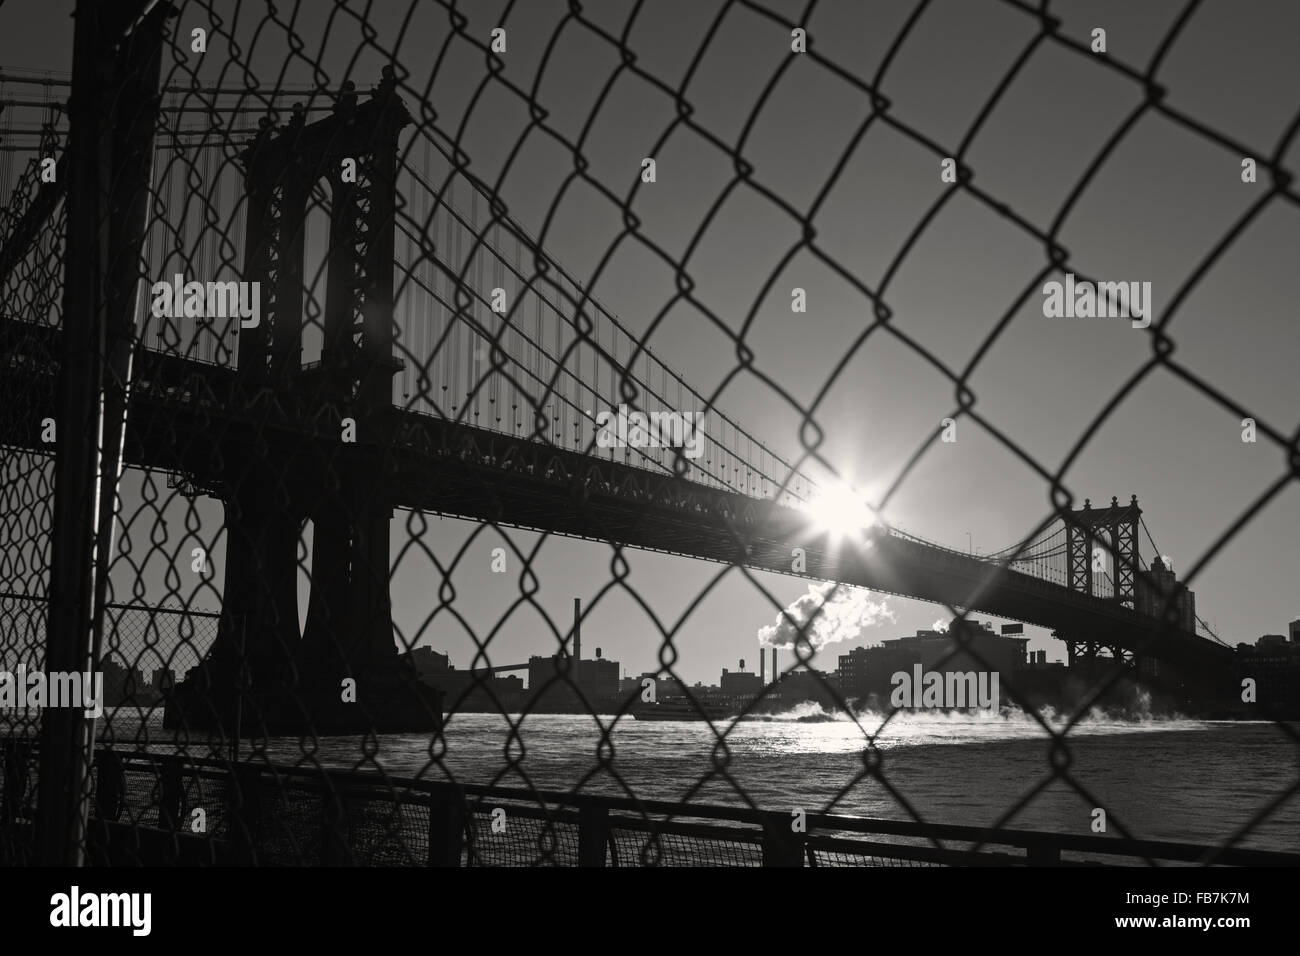 Distorted industrial view of Manhattan Bridge waterfront New York City through a wire safety fence. Monochrome, black and white image. Stock Photo